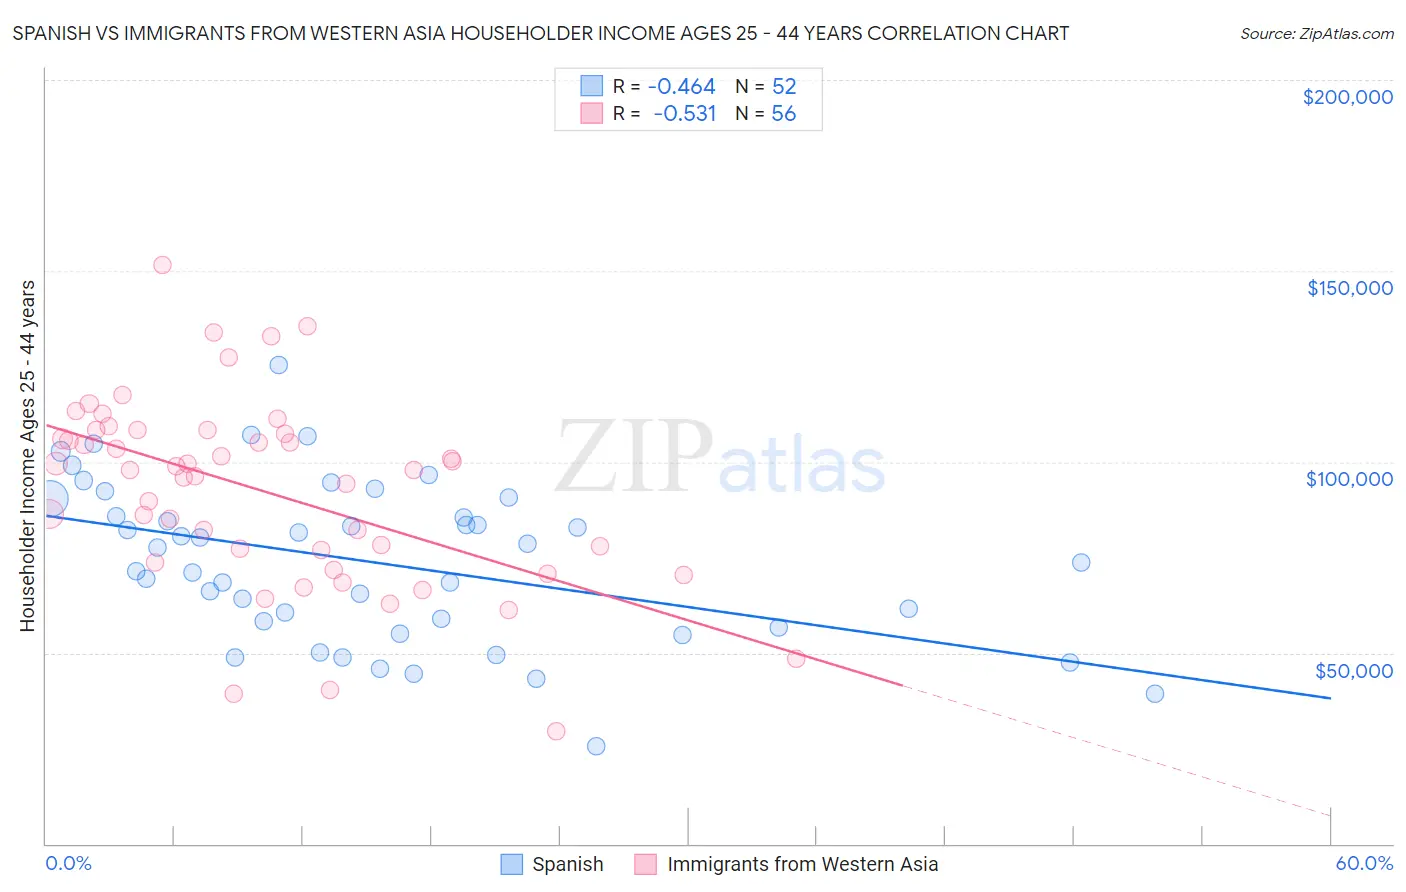 Spanish vs Immigrants from Western Asia Householder Income Ages 25 - 44 years